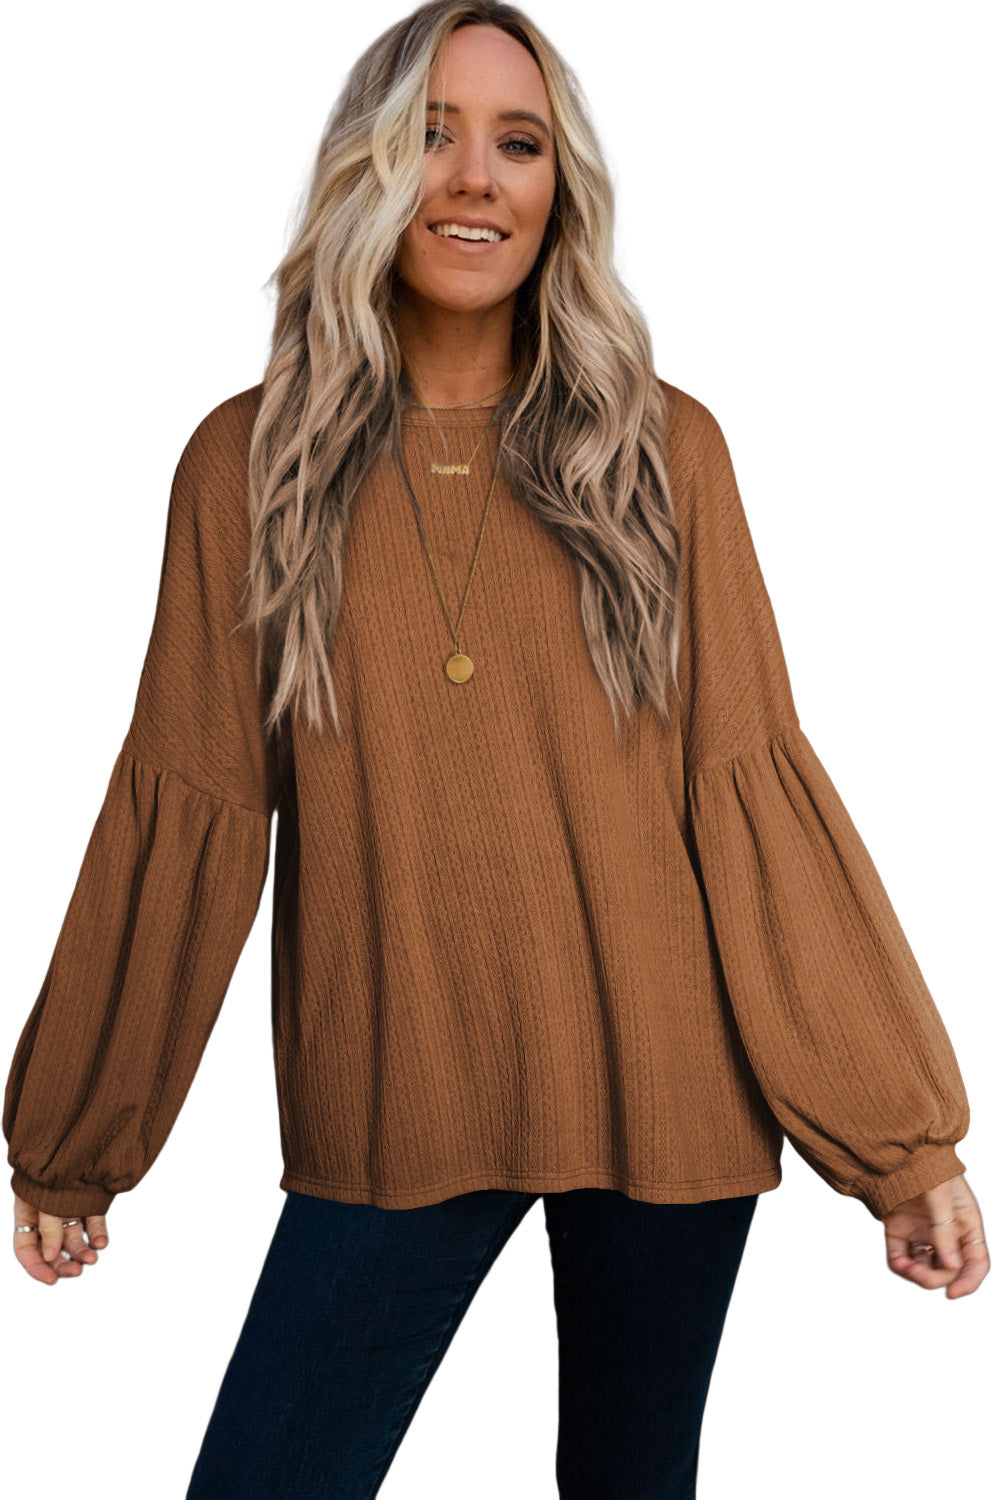 Orange Faux Knit Jacquard Puffy Long Sleeve Top – The Pink